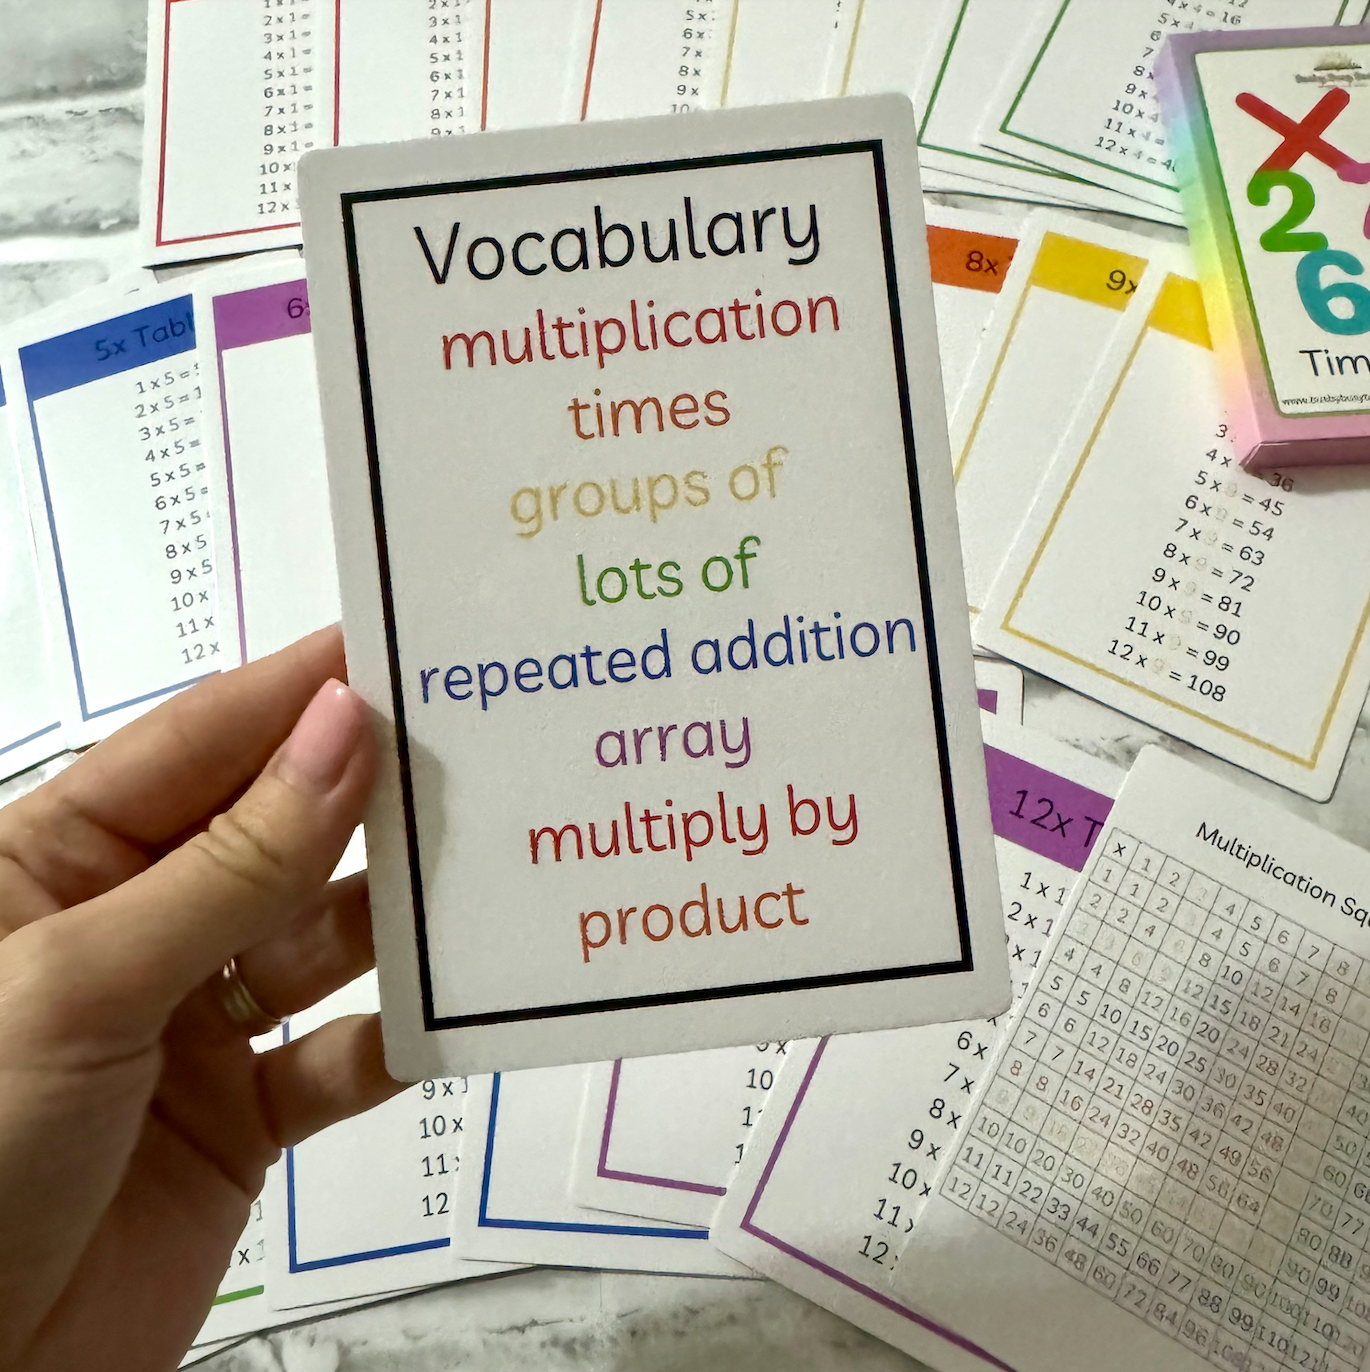 Flashcards - Times Tables